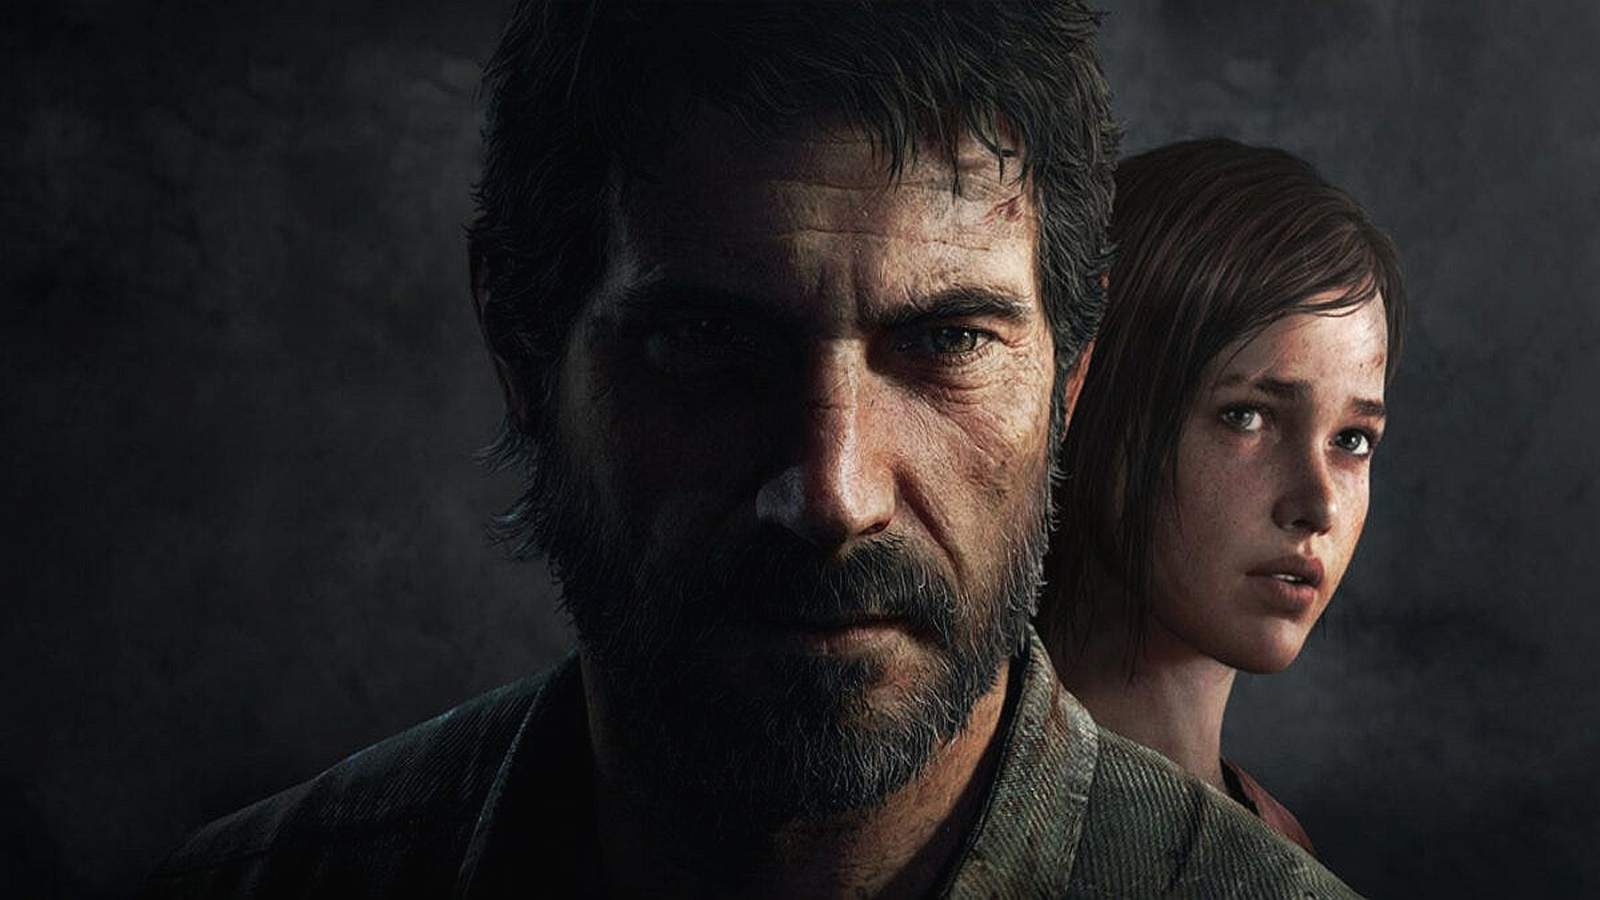 The Last of Us on PC gets patches to fix some performance issues - The Verge